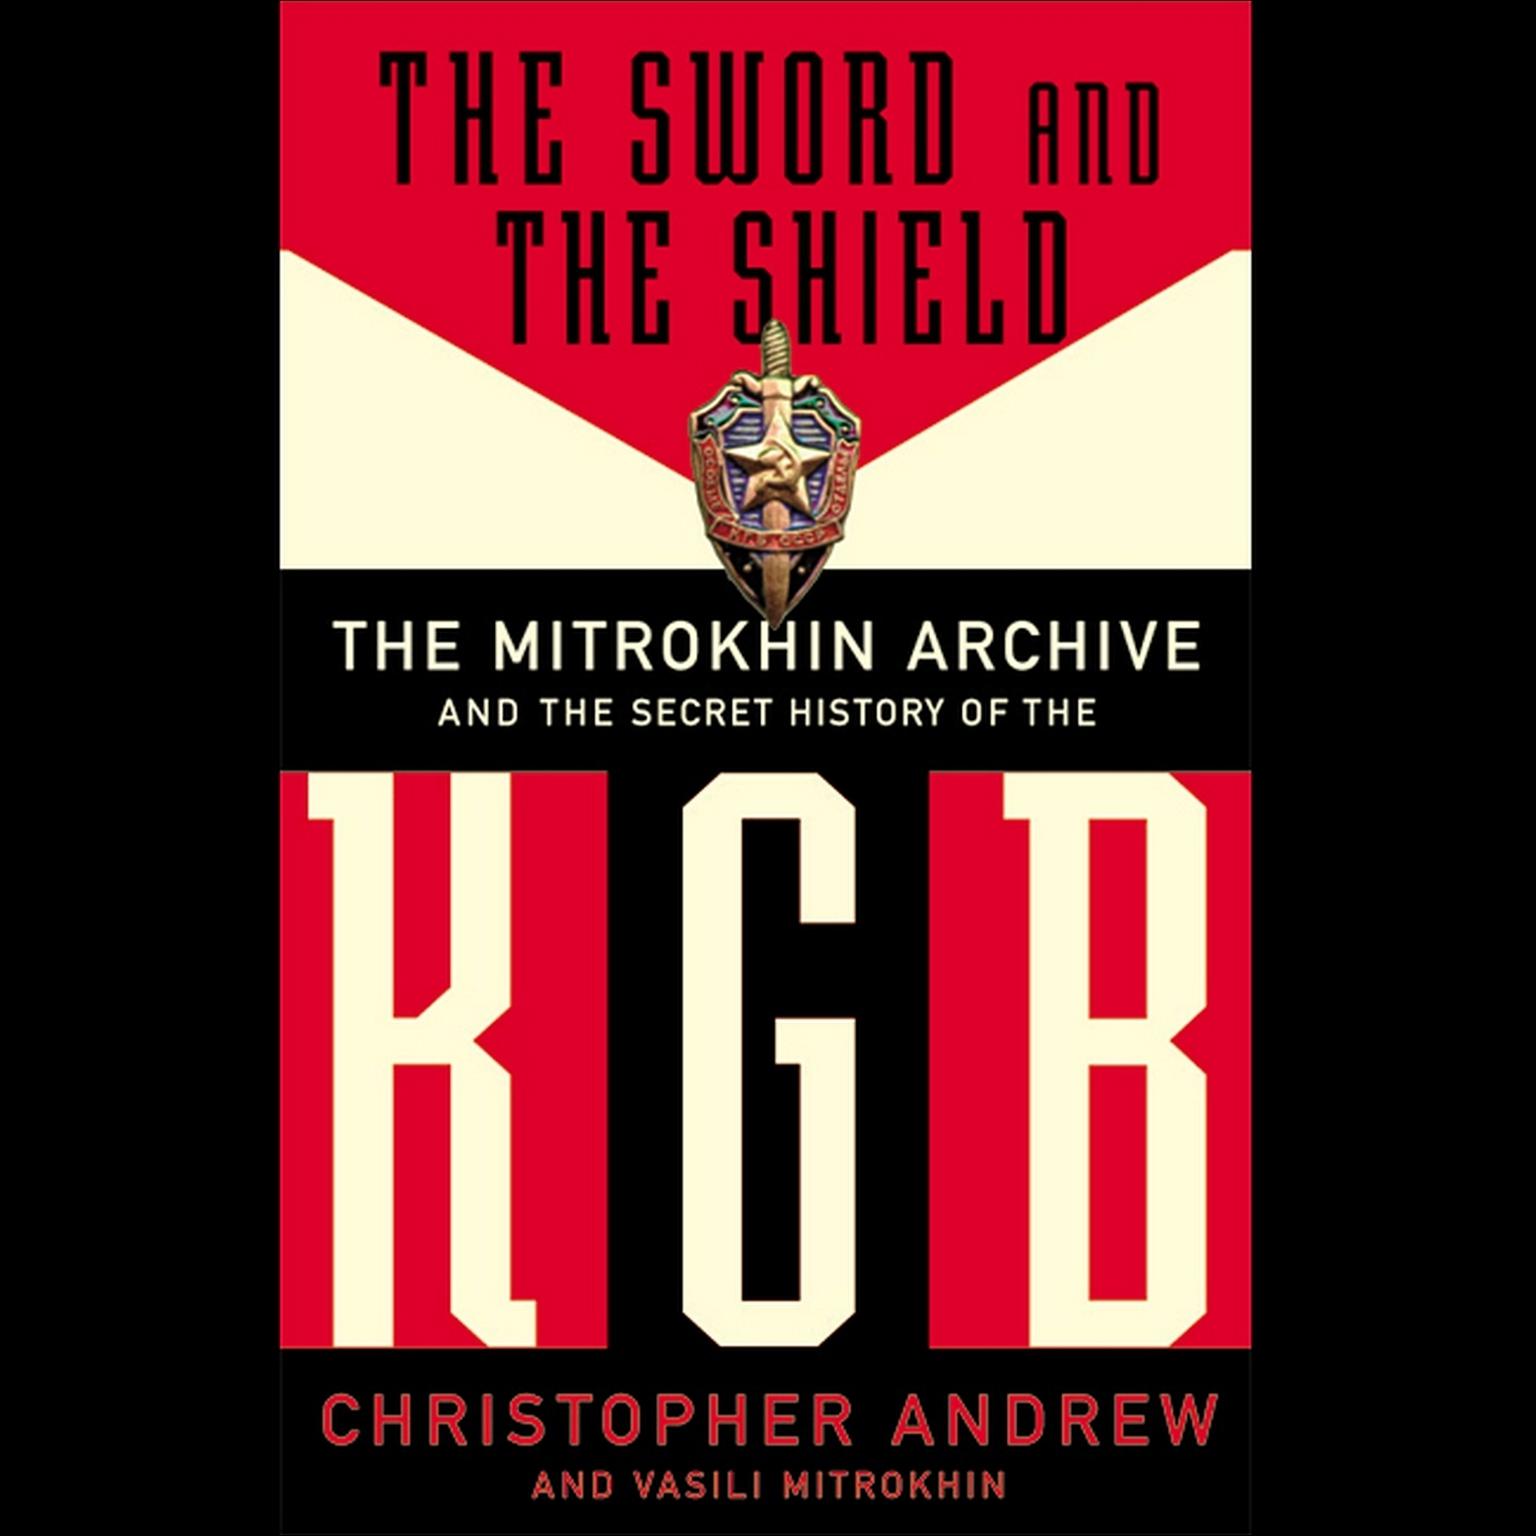 The Sword and the Shield (Abridged): The Mitrokhin Archive and the Secret History of the KGB Audiobook, by Christopher Andrew